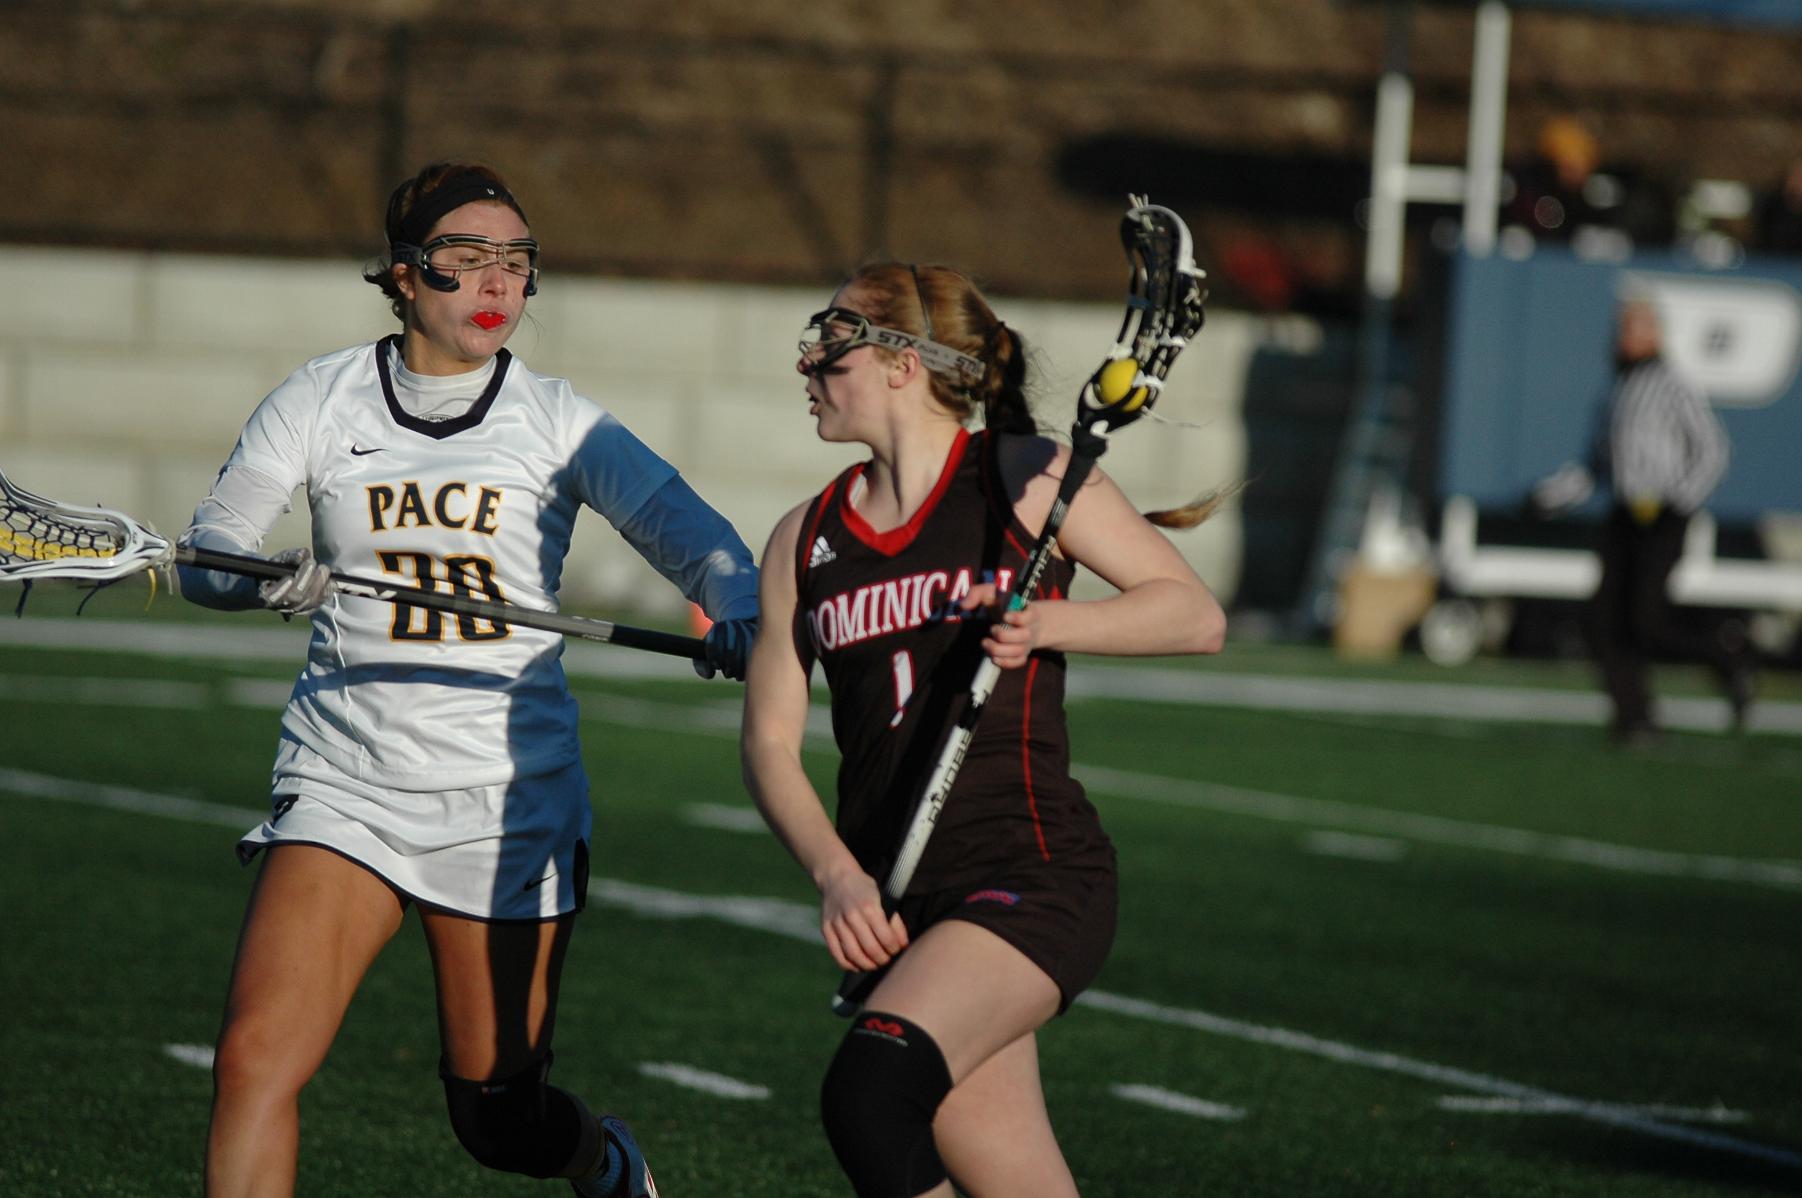 FITZGERALD SCORES 100TH CAREER GOAL IN VICTORY OVER NYACK COLLEGE